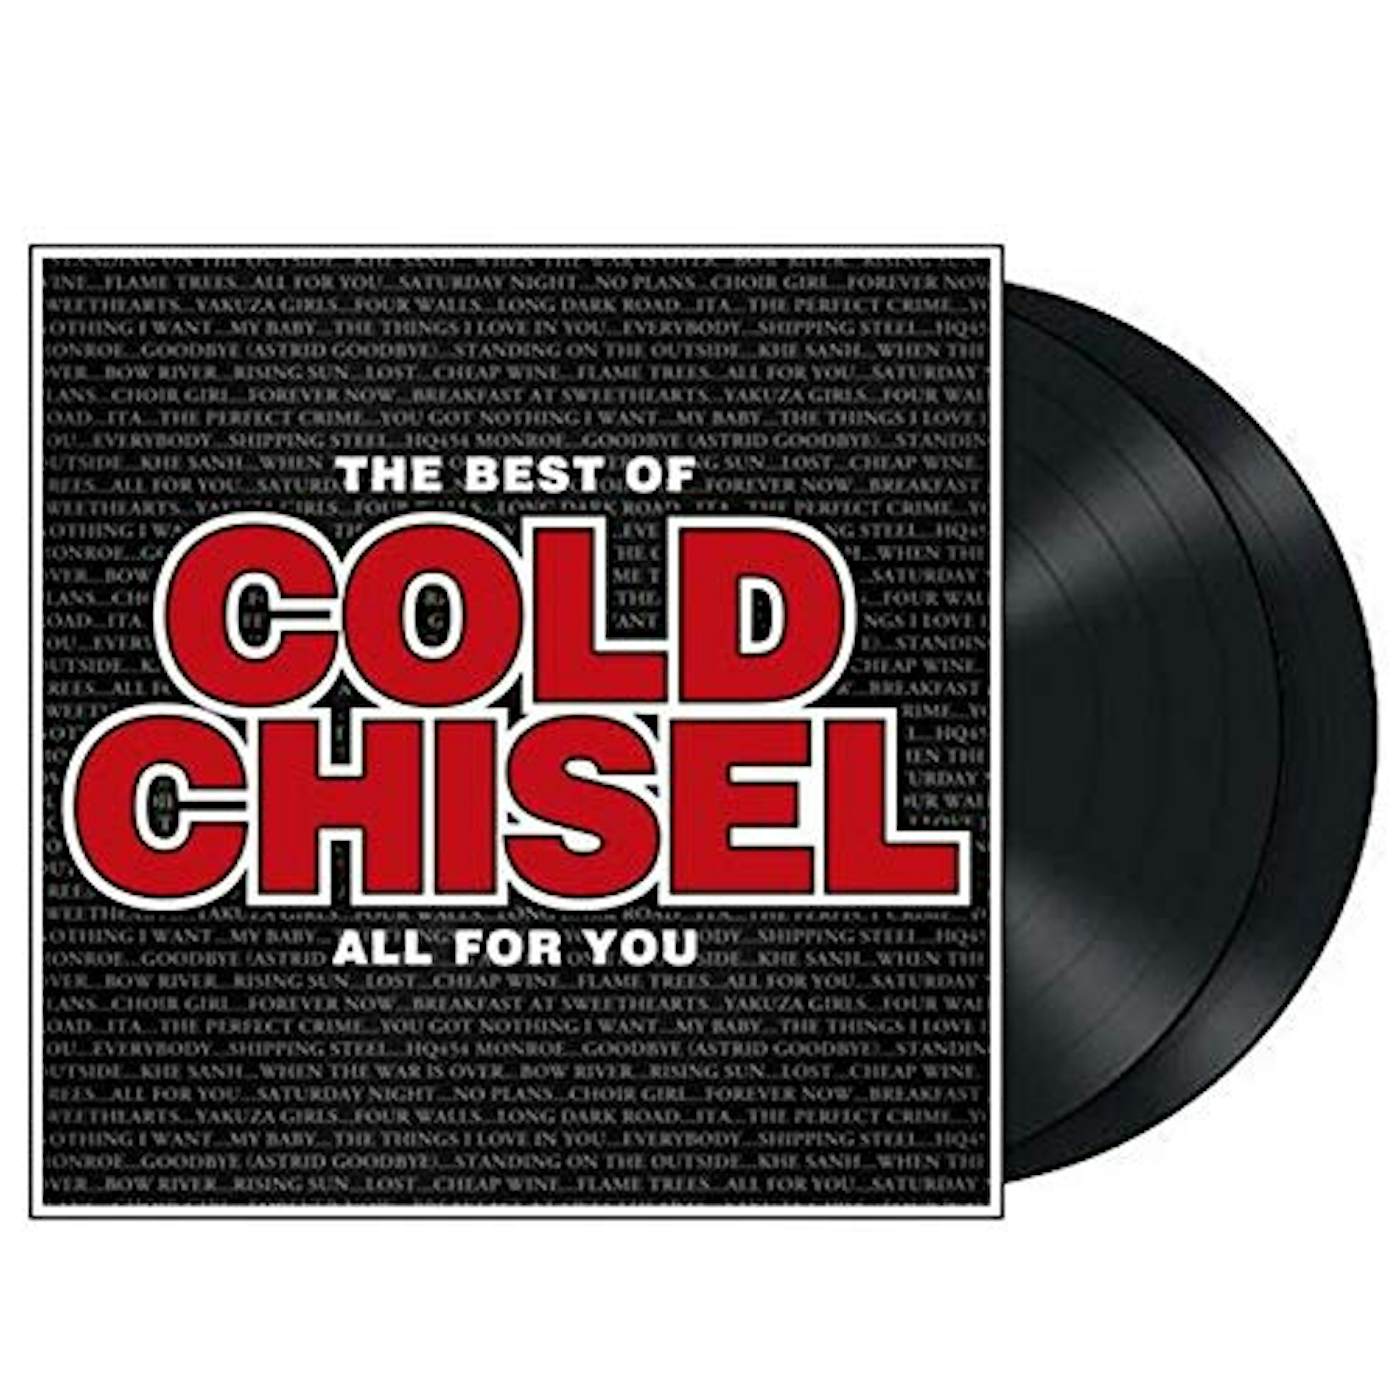 ALL FOR YOU: THE BEST OF COLD CHISEL Vinyl Record